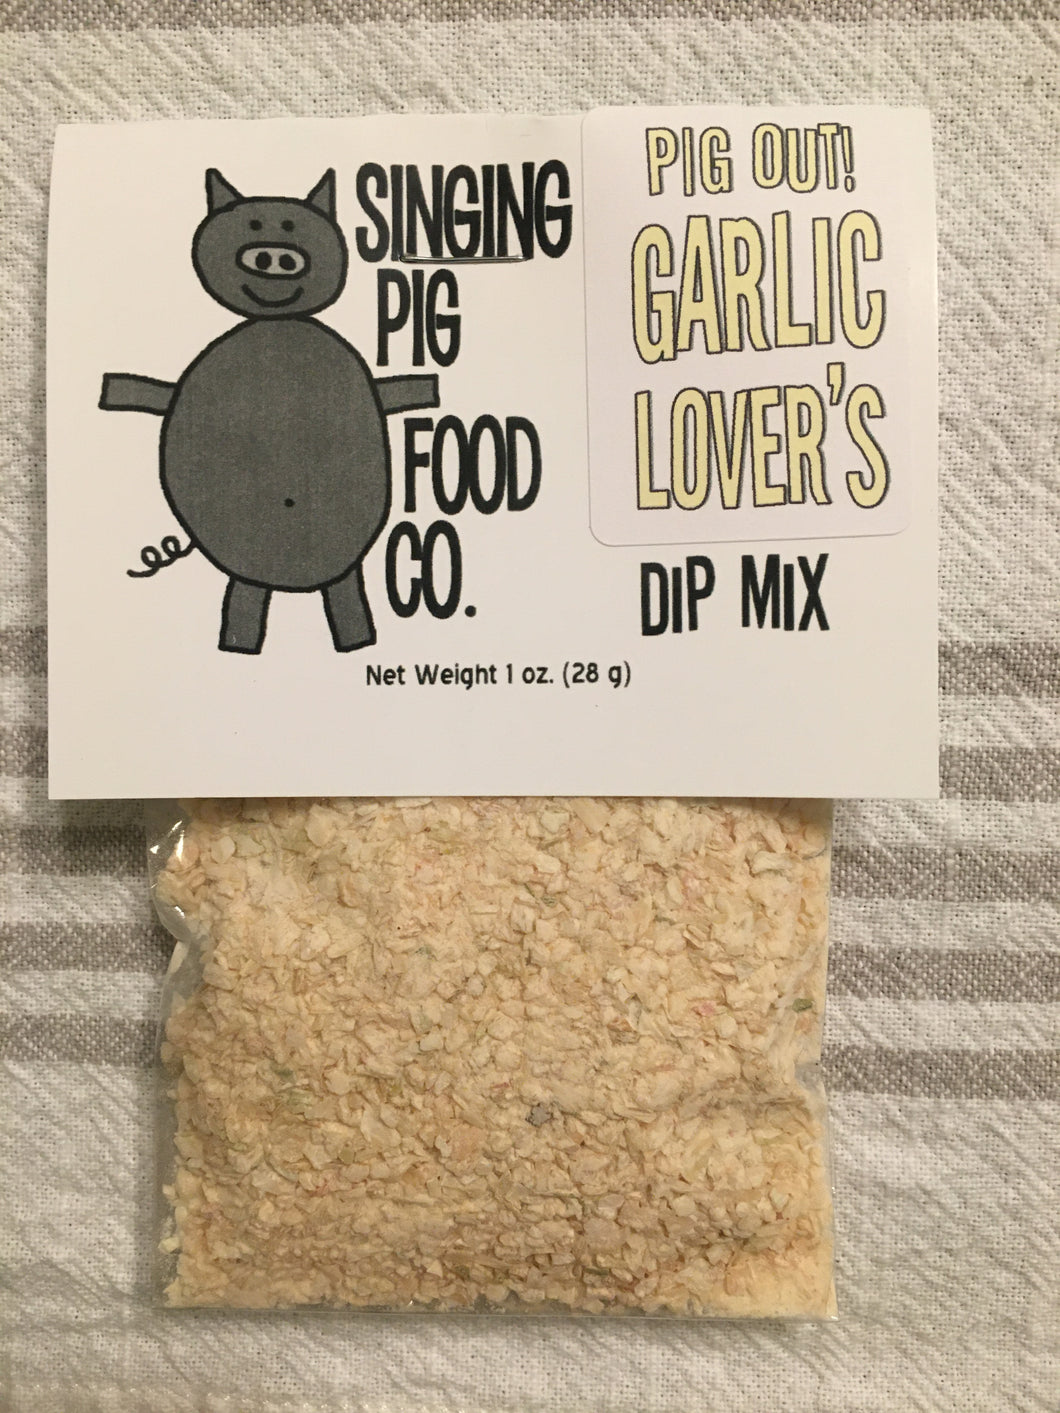 Pig Out! Garlic Lover's